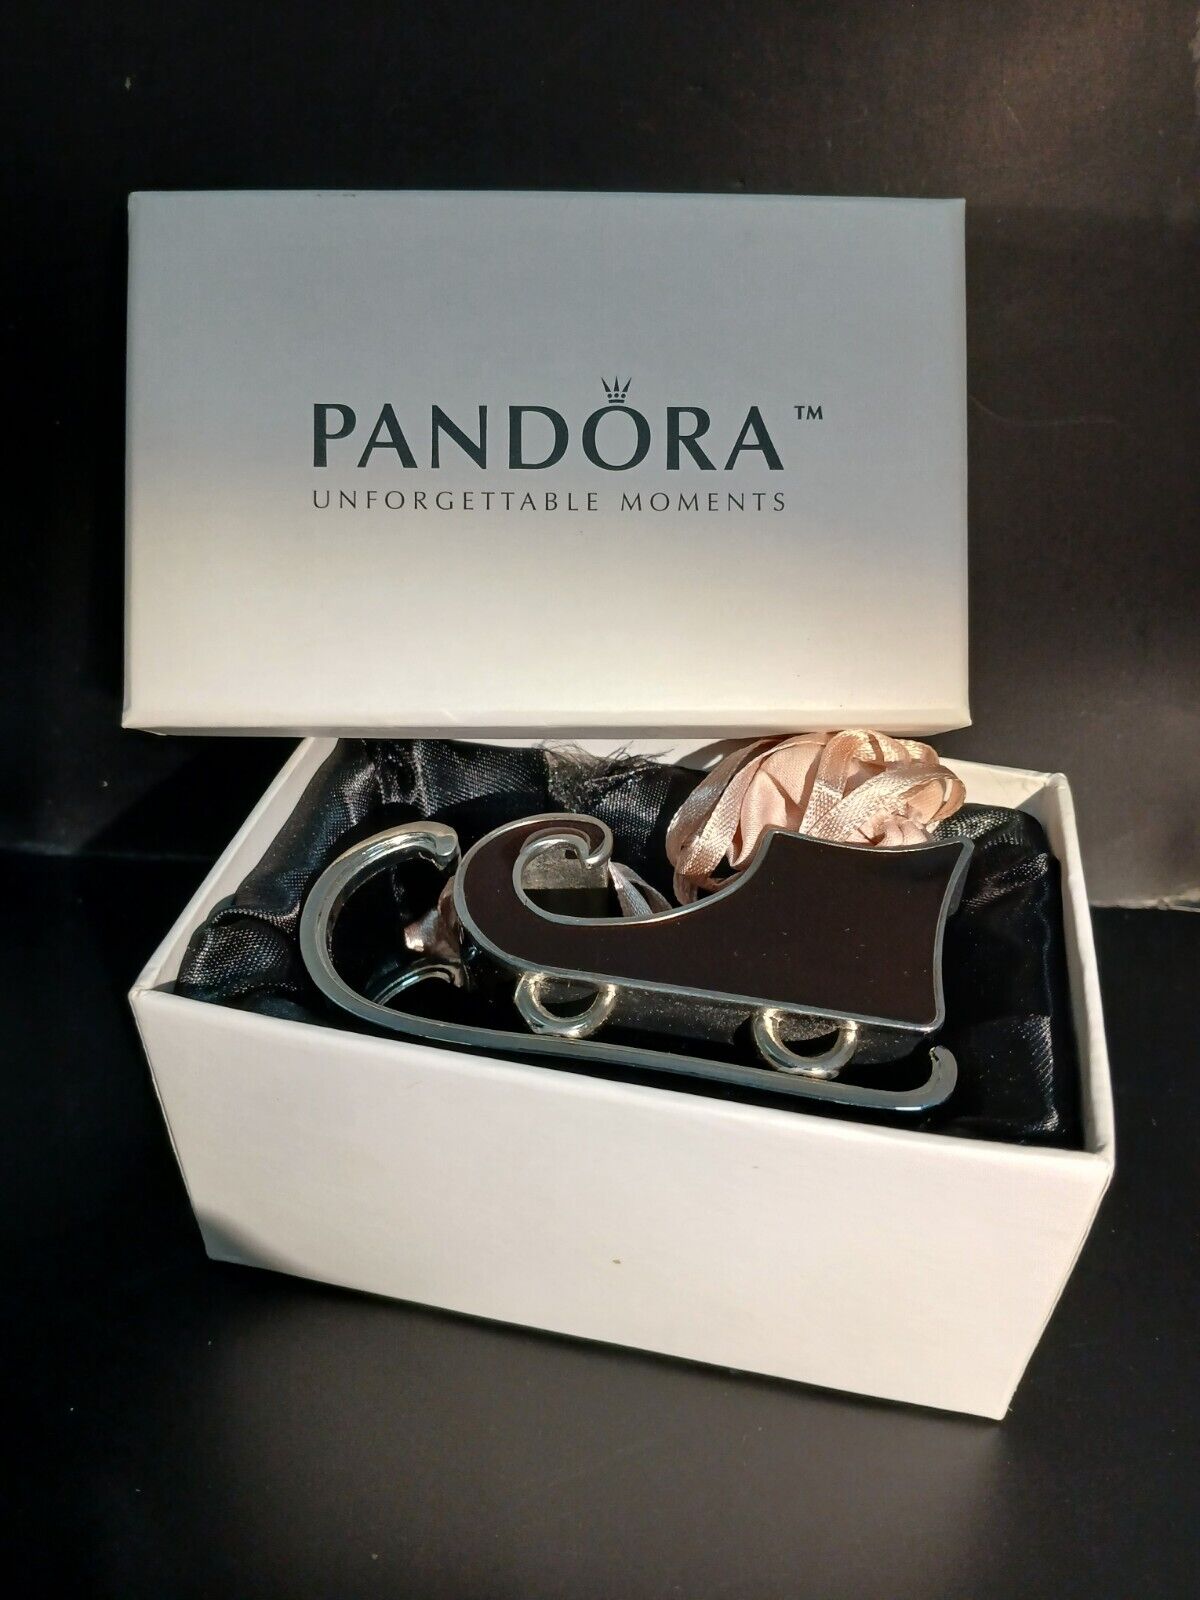 Pandora Unforgettable Moments 2010 Christmas Sleigh Ornament Collect 3rd In Seri